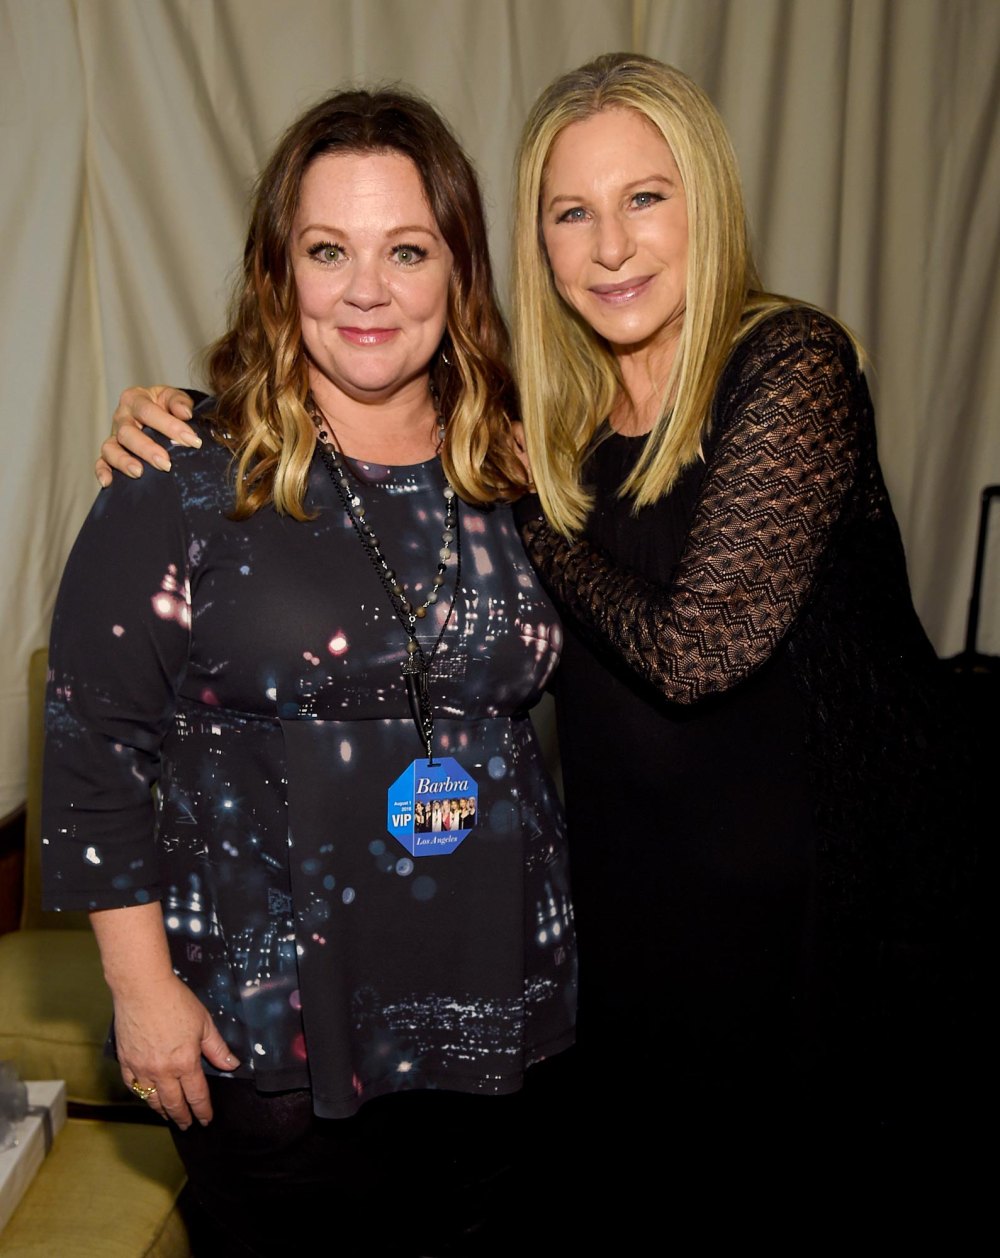 Barbra Streisand Kind of Addresses Melissa McCarthy Ozempic Comment- “The World Is Reading 411